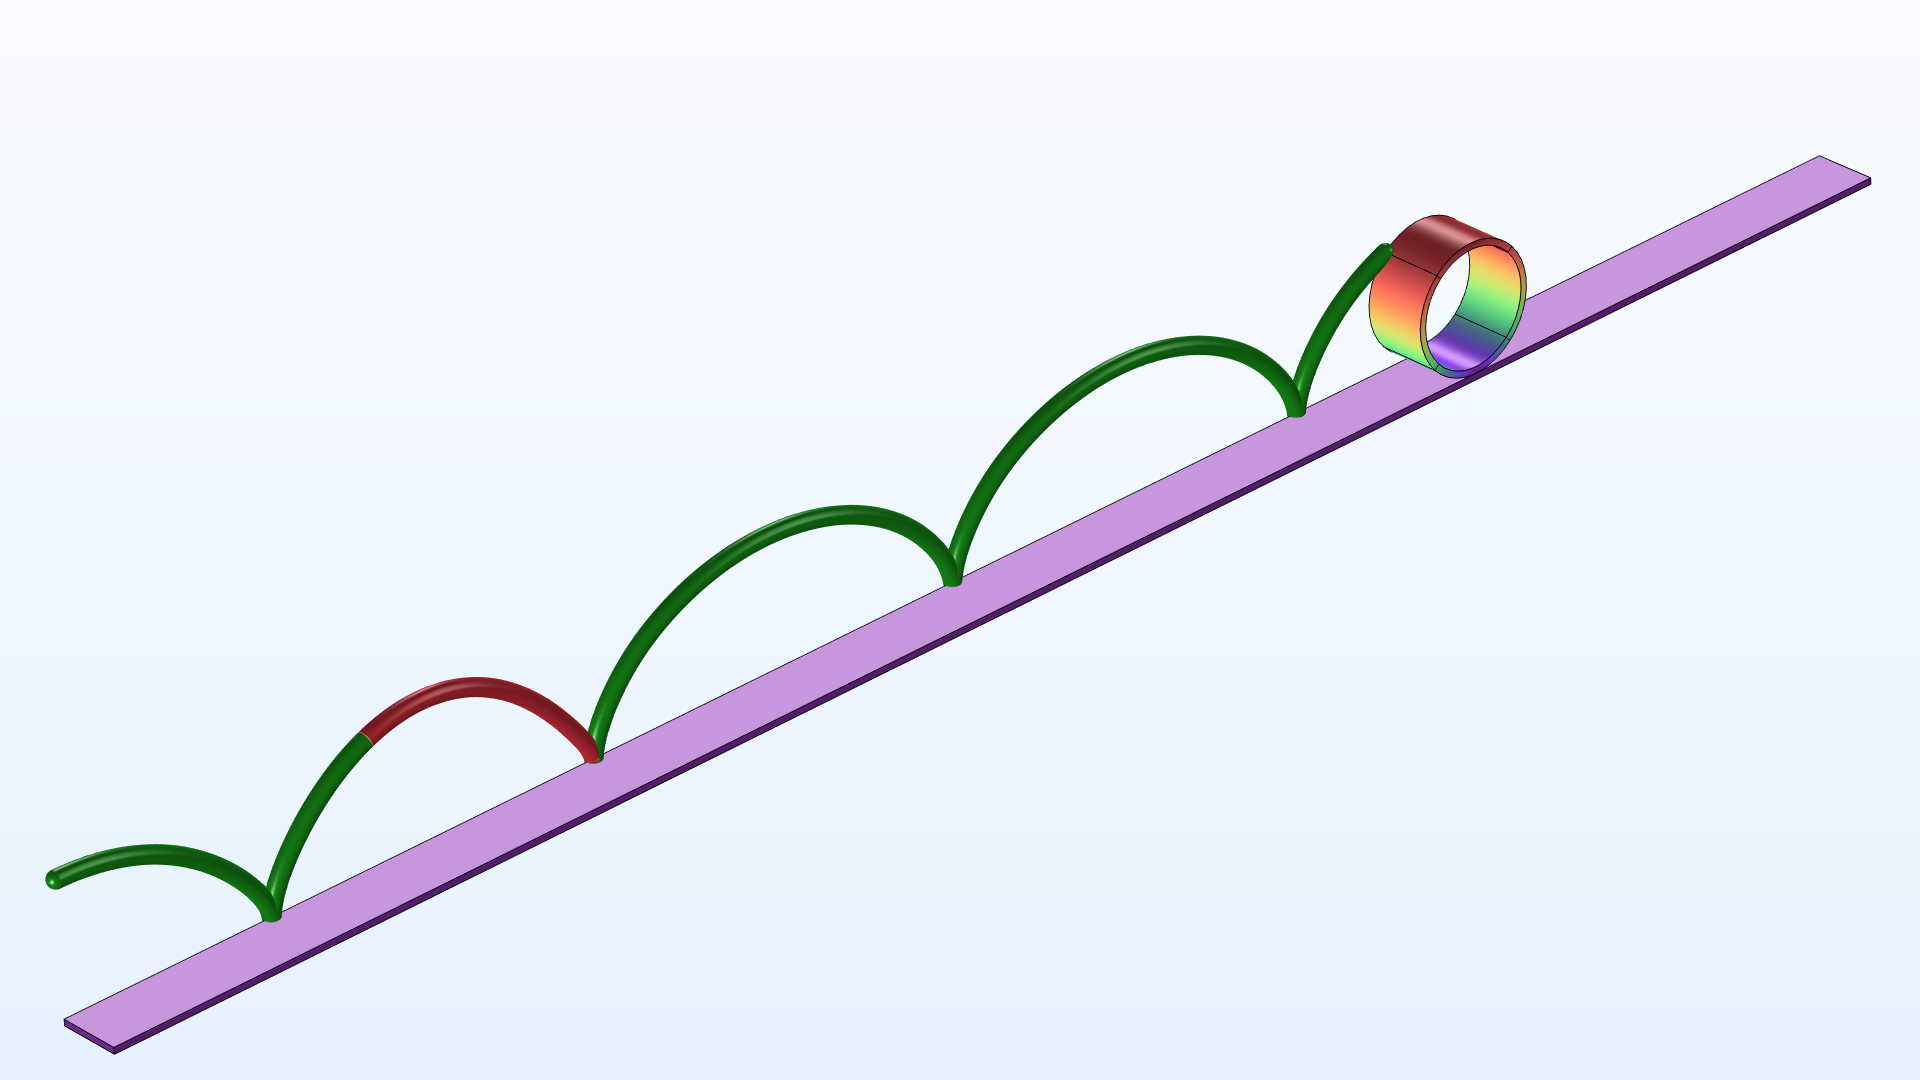 A hoop geometry going across a flat surface, showing the velocity.